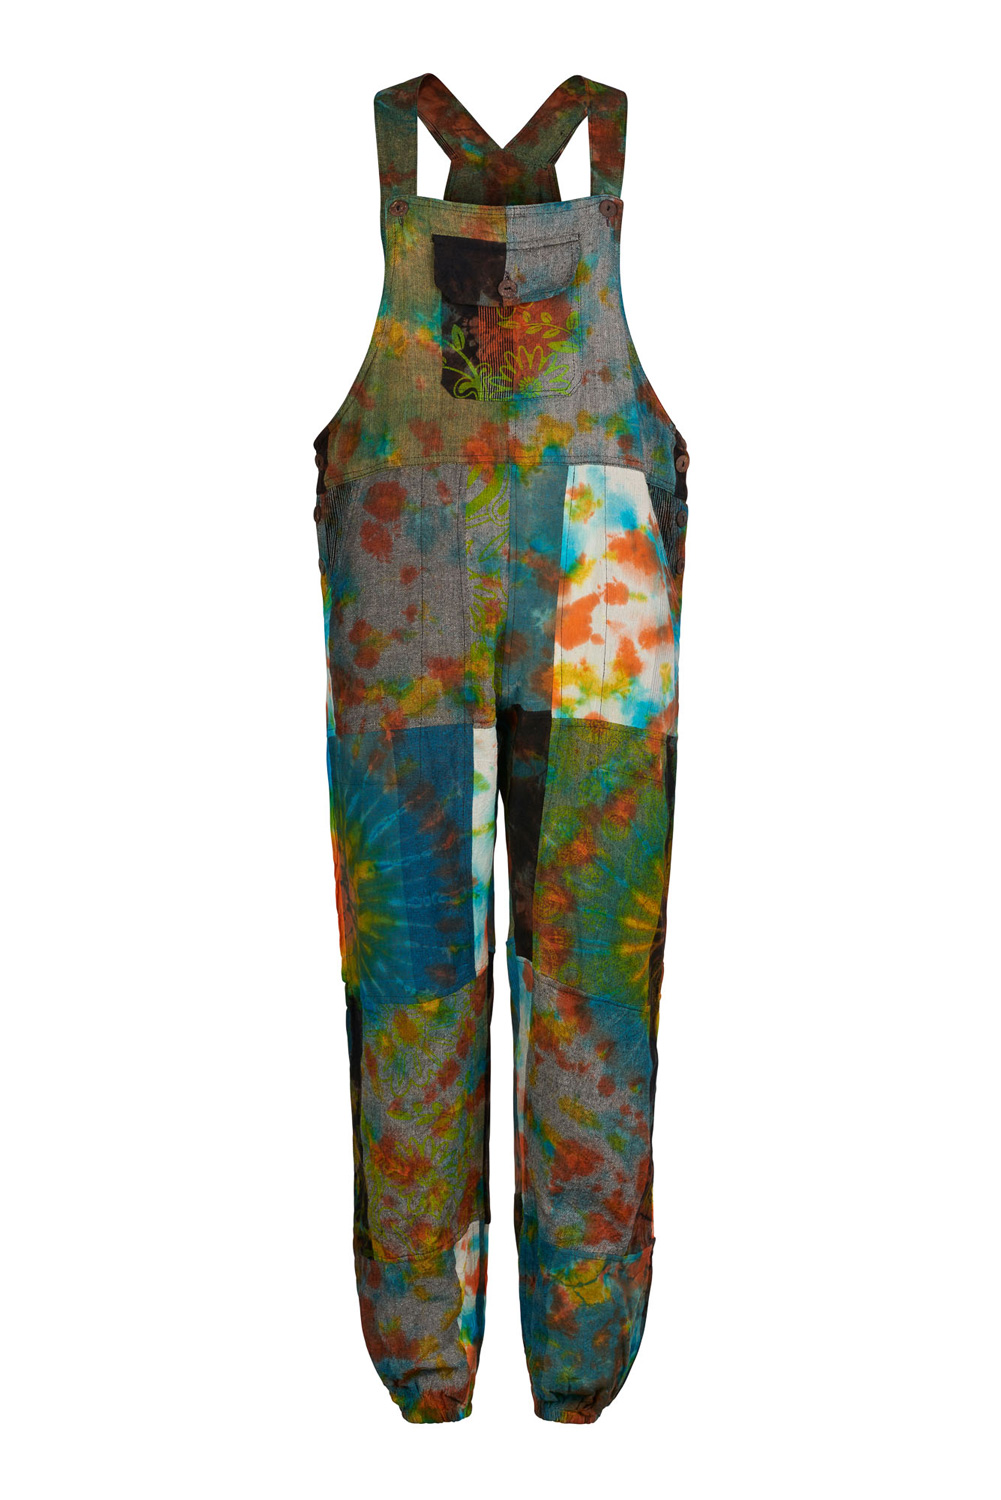 Wicked Dragon Clothing - Hippie tie dye patchwork dungarees